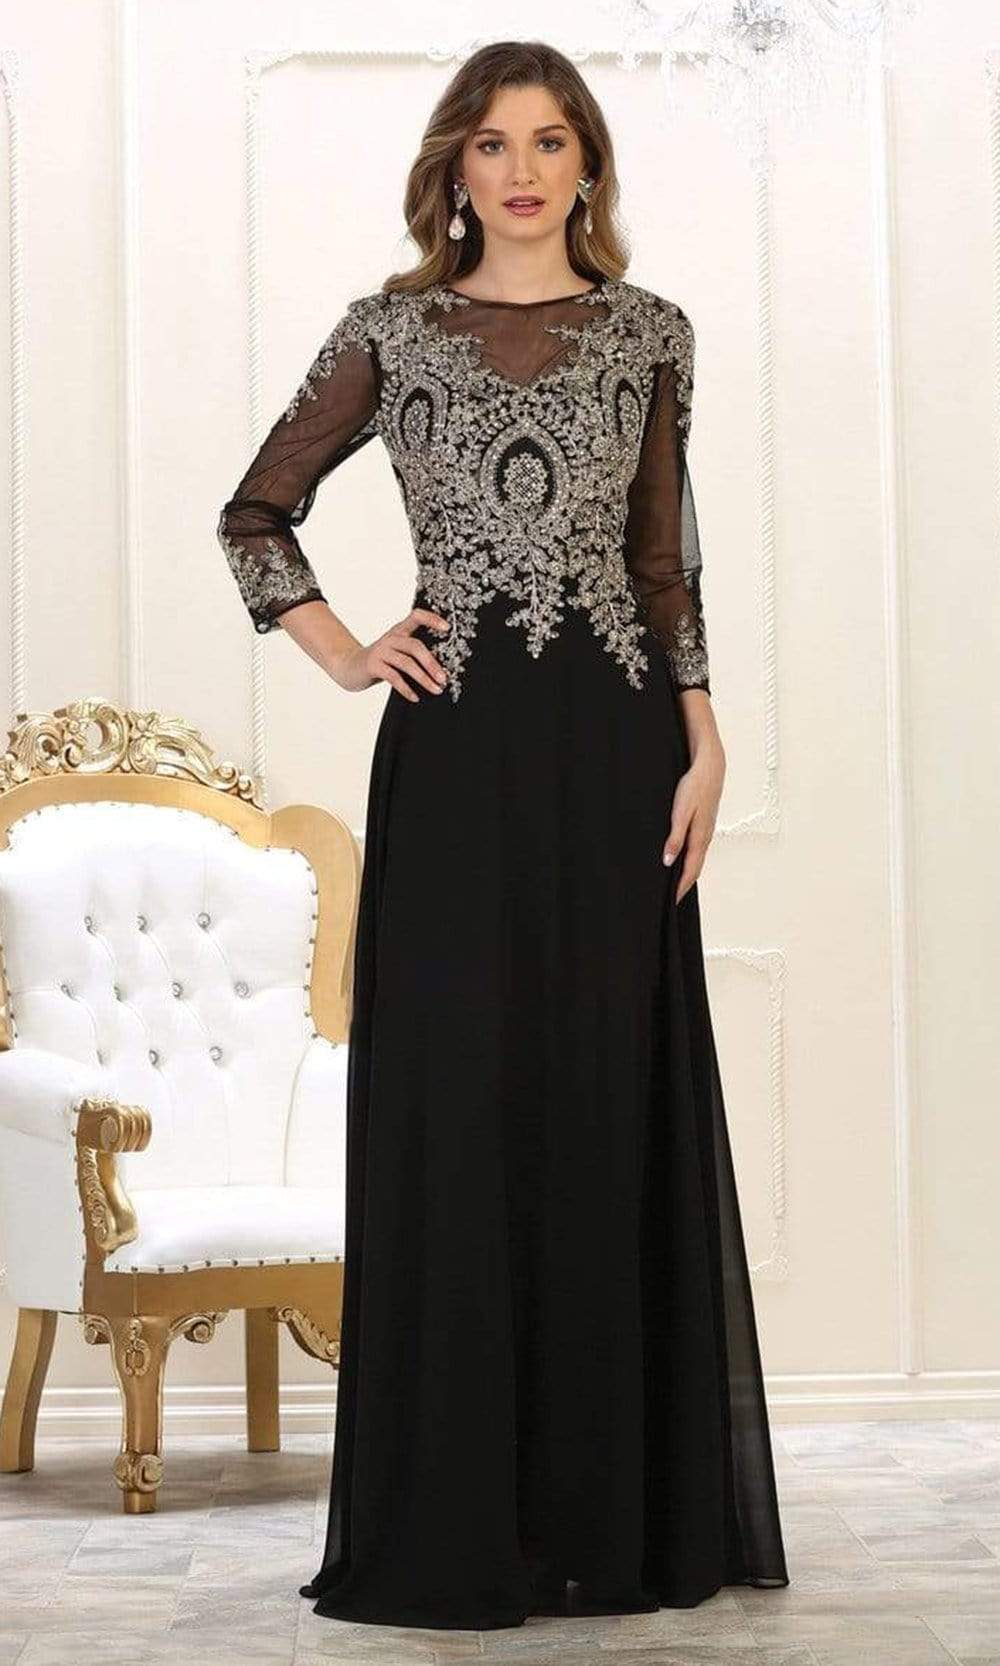 May Queen - MQ1549 Embroidered Long Sleeve Sheath Dress